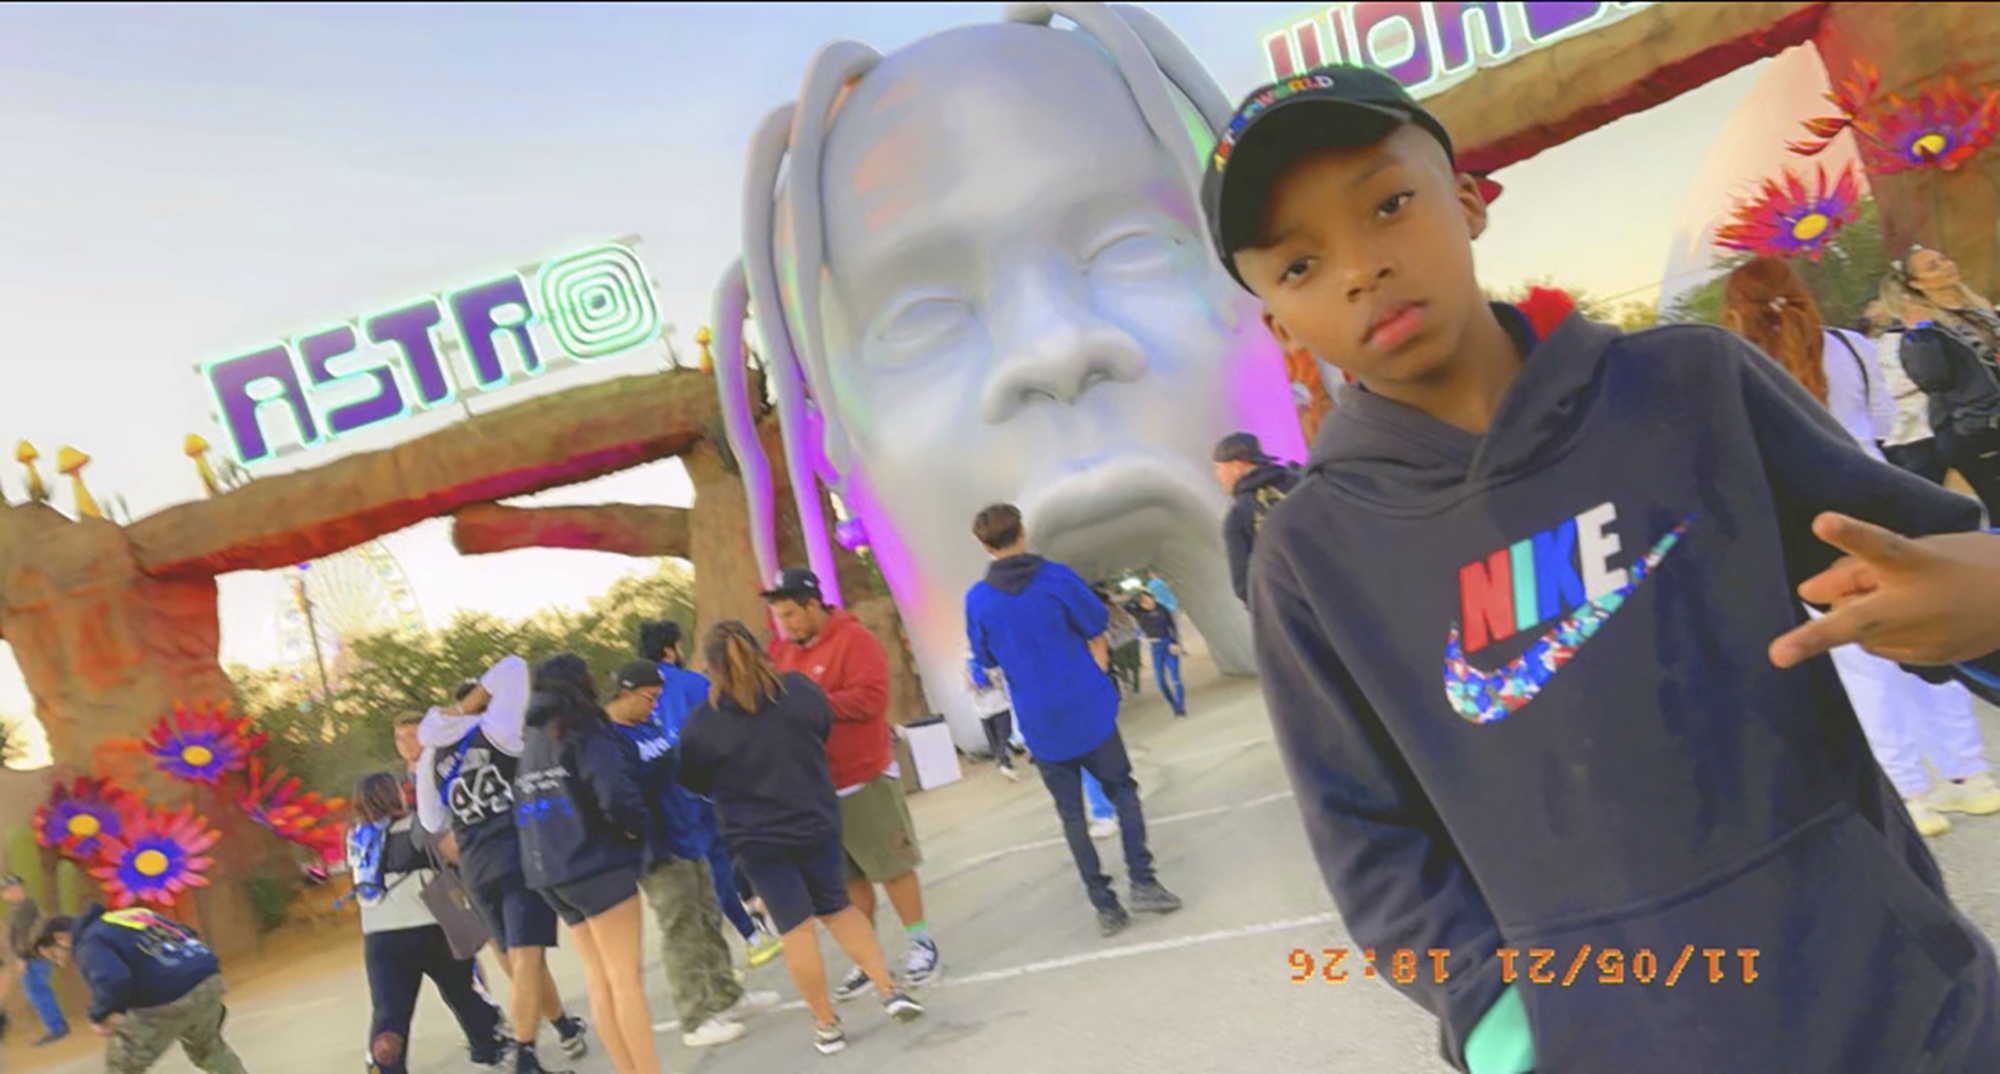 A tribute to the Astroworld concert tragedy victims